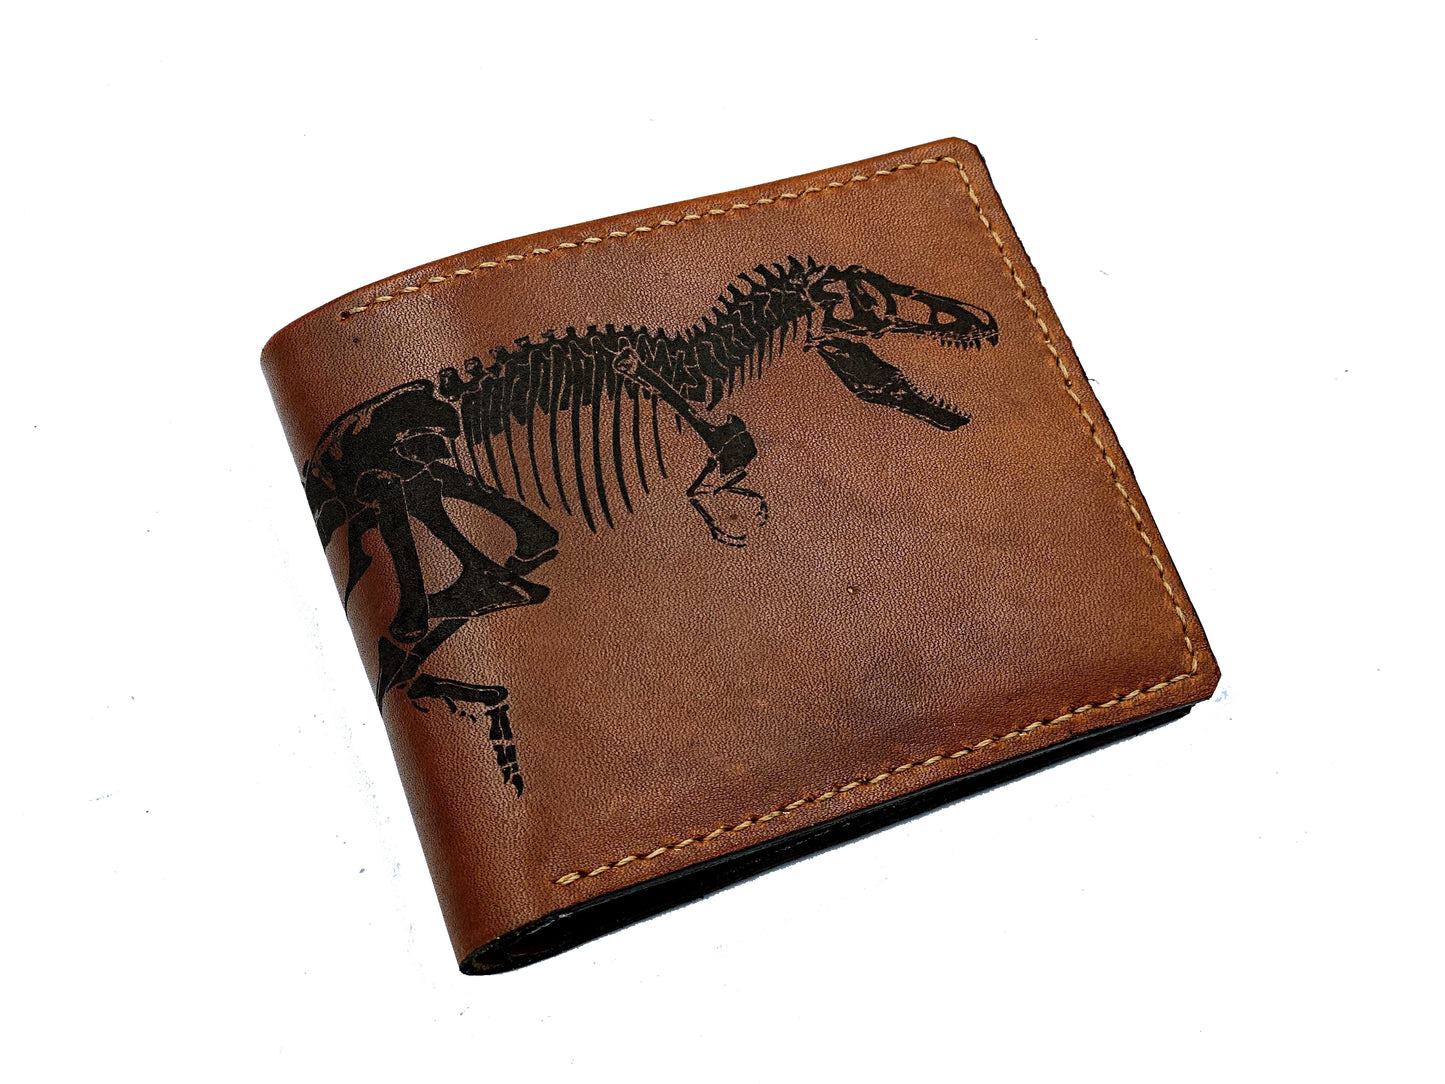 Mayan Corner - T-rex skeleton dinosaurus fossil leather handmade men's wallet, custom gifts for him, father's day gifts, anniversary gift for men